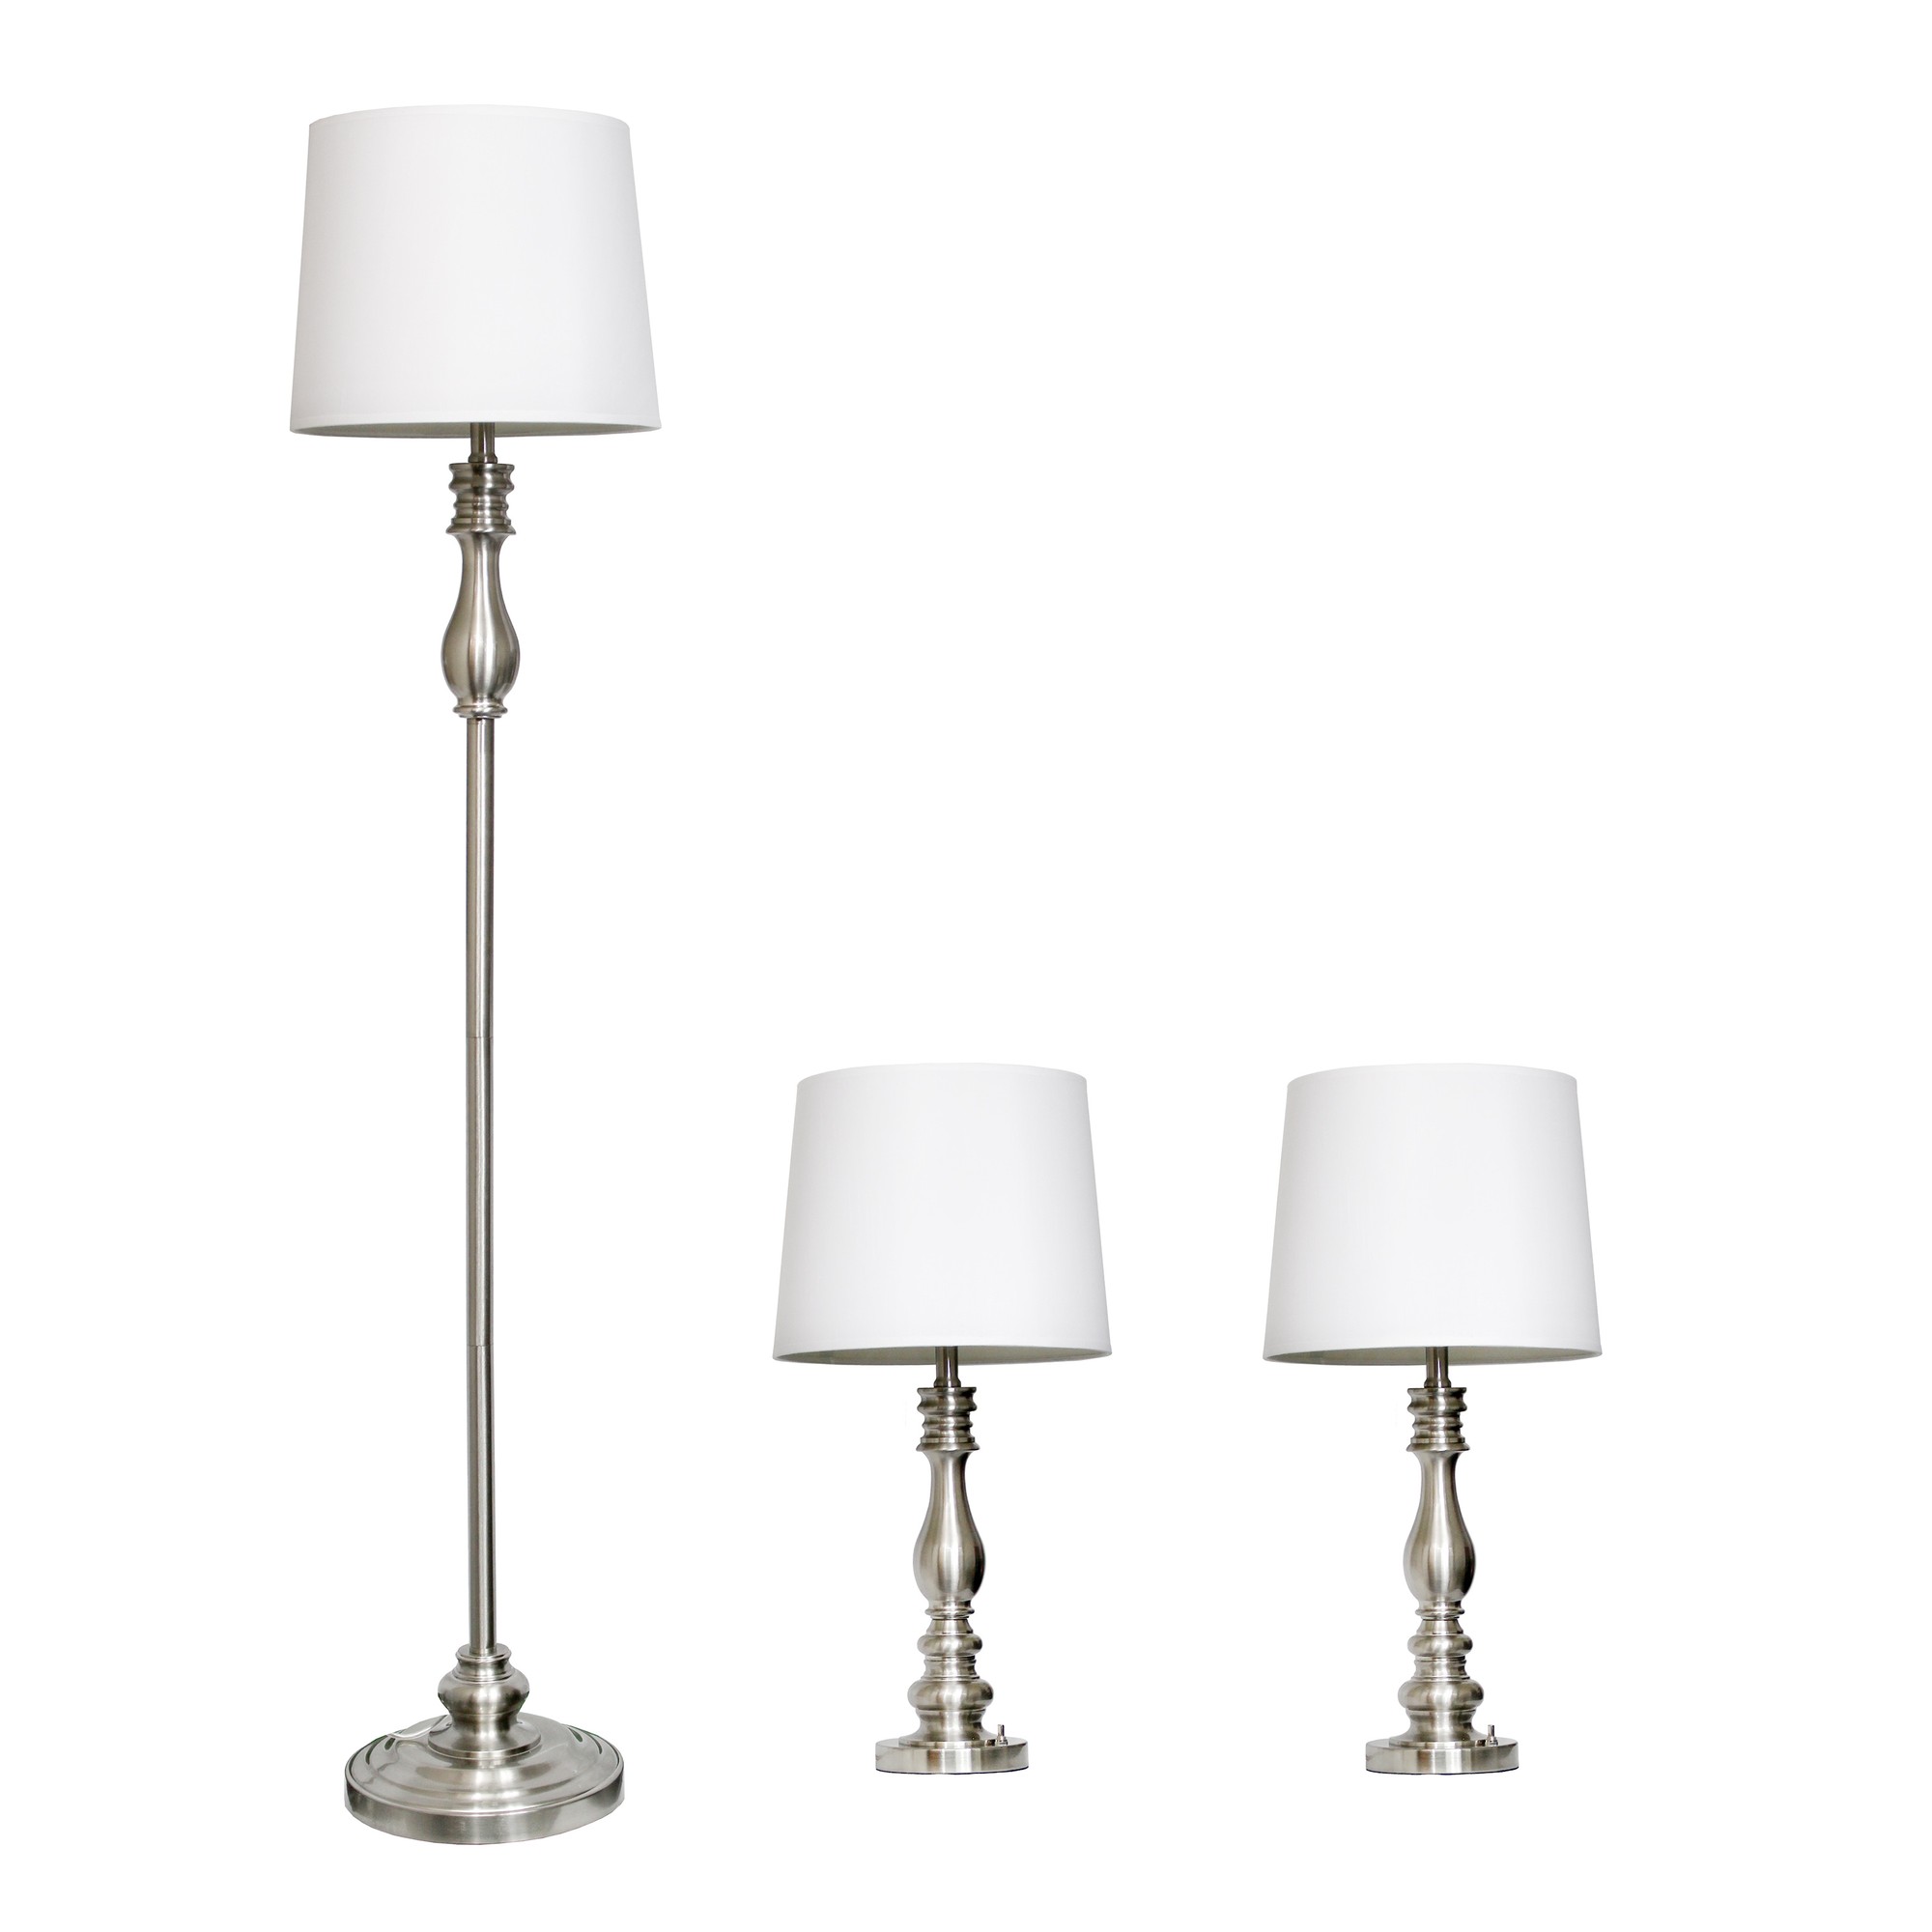 Lalia Home 3 Piece Metal Lamp Set (2 Table Lamps, 1 Floor Lamp) White Drum Fabric Shades and Brushed Steel Finish